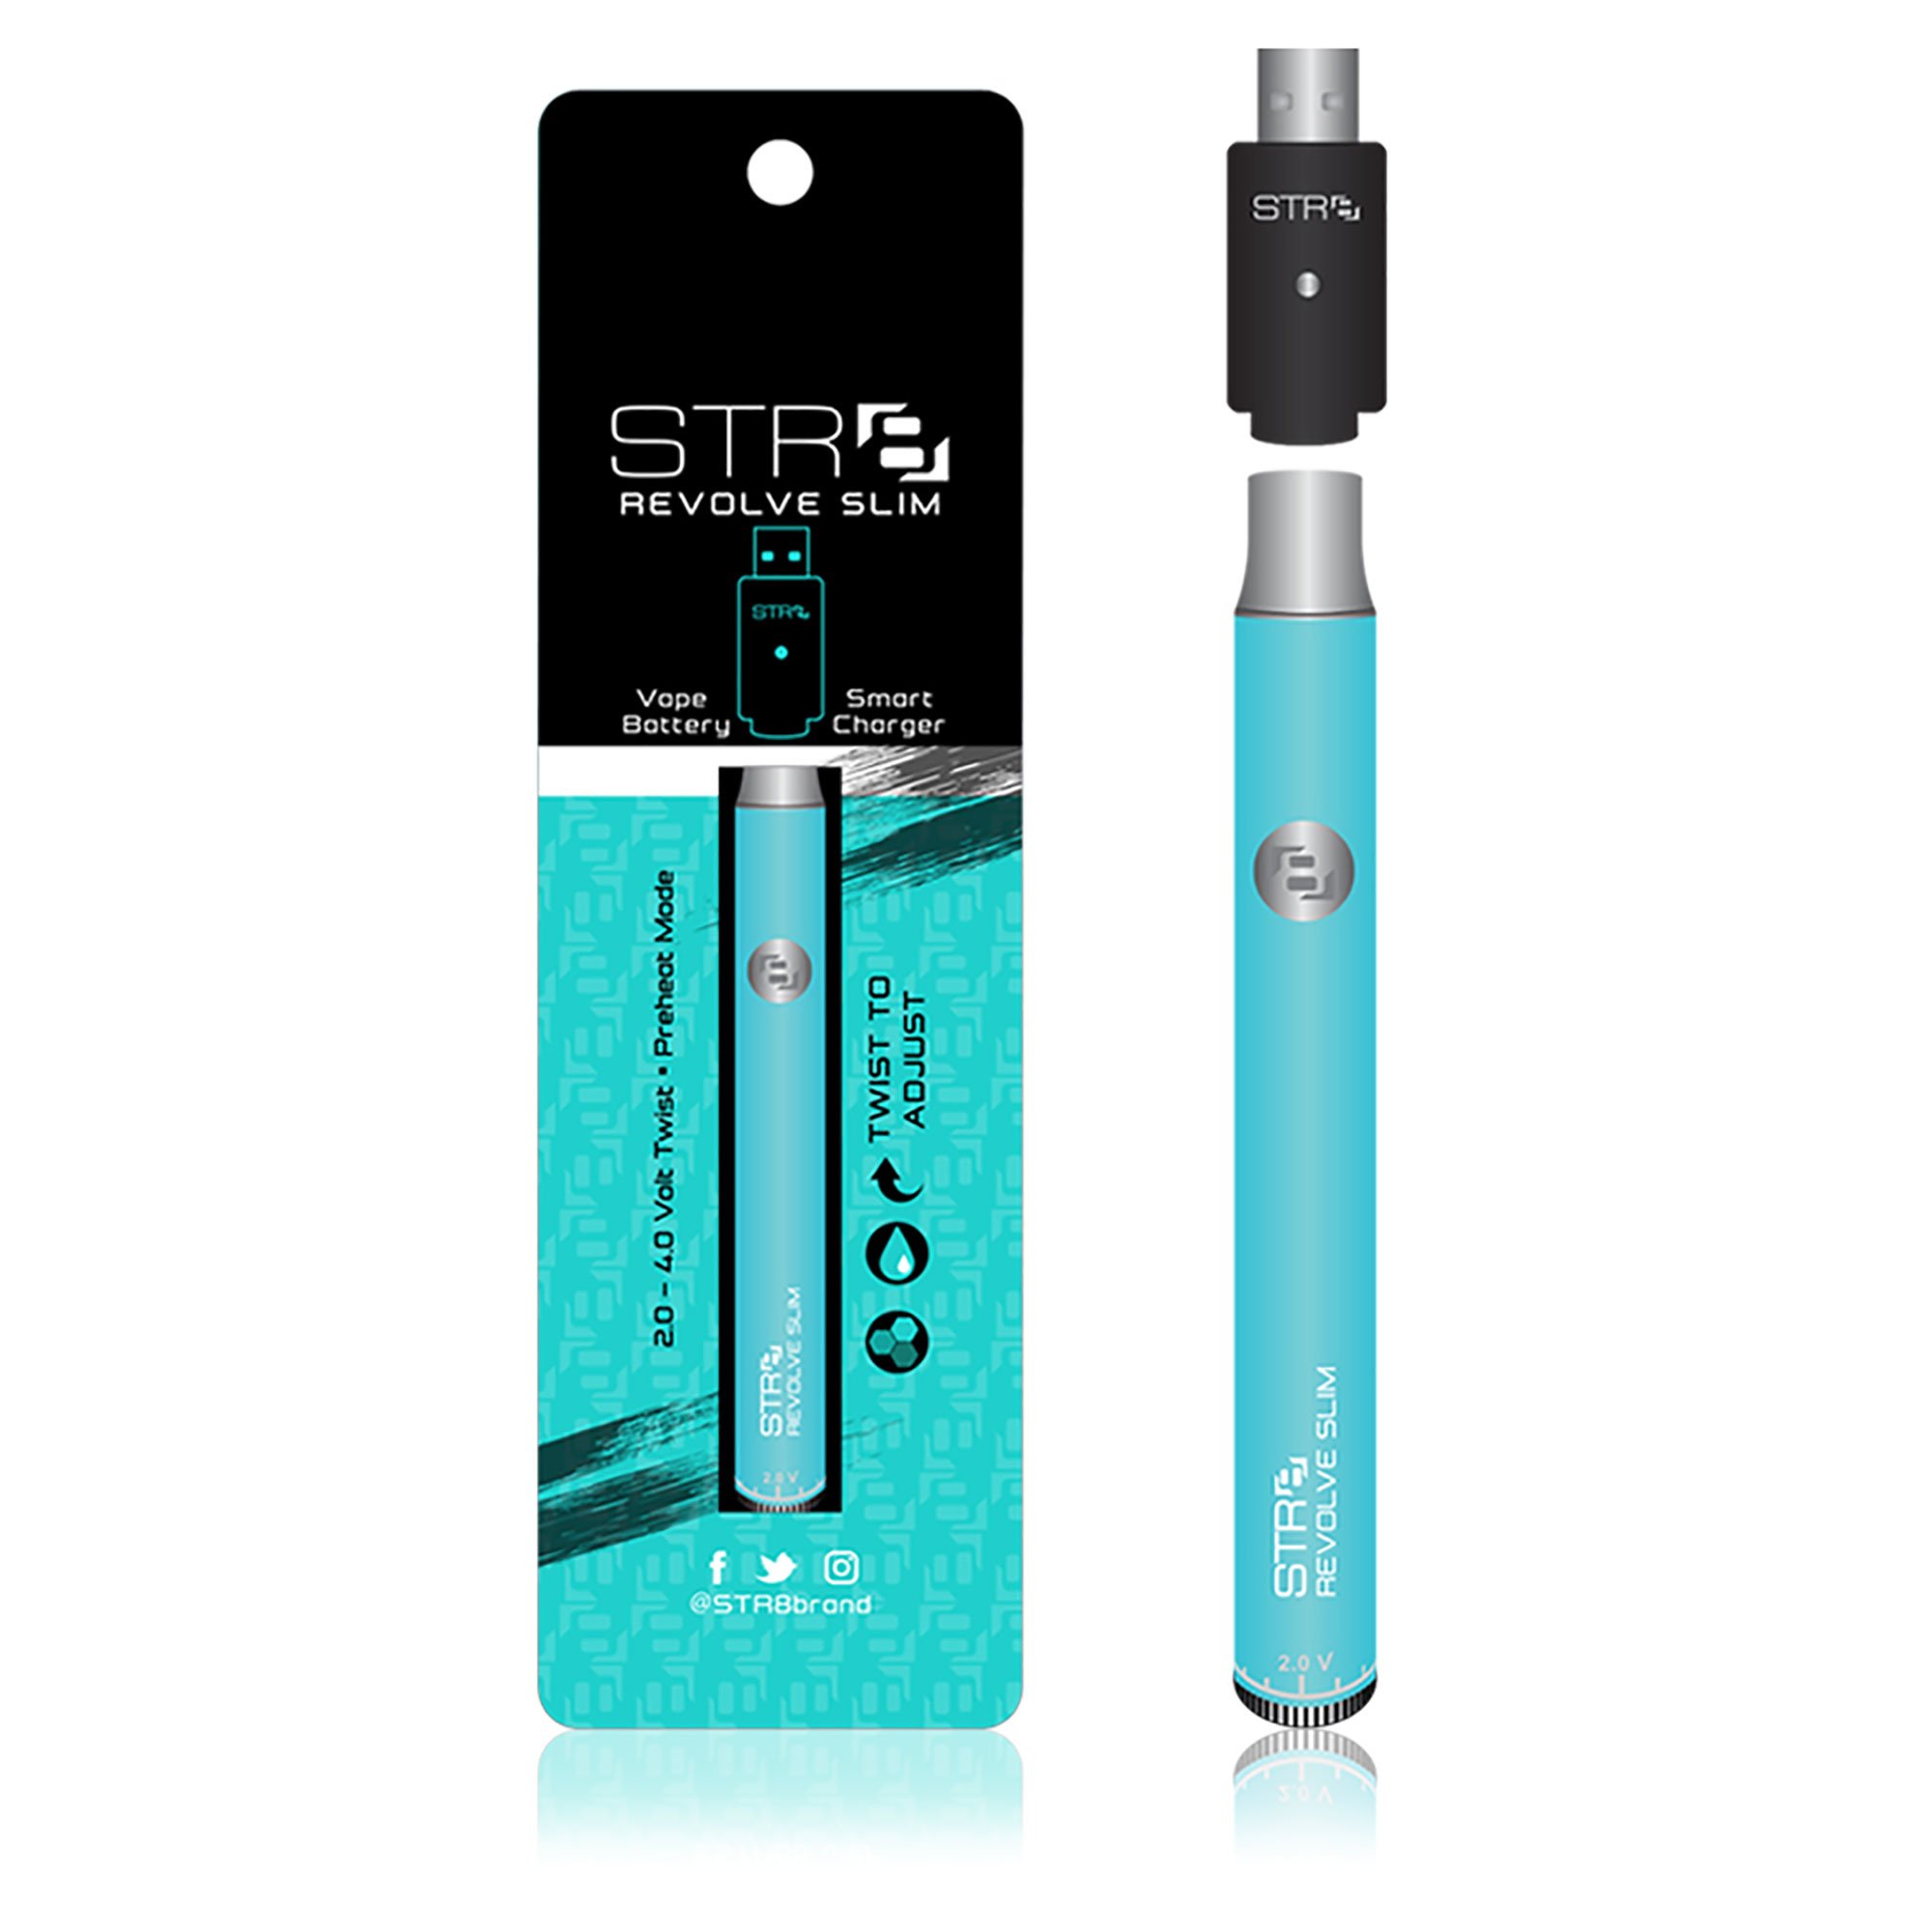 STR8 | Slim Revolve Battery w/ Charger | 320mAh - Teal - 5 Count - 1